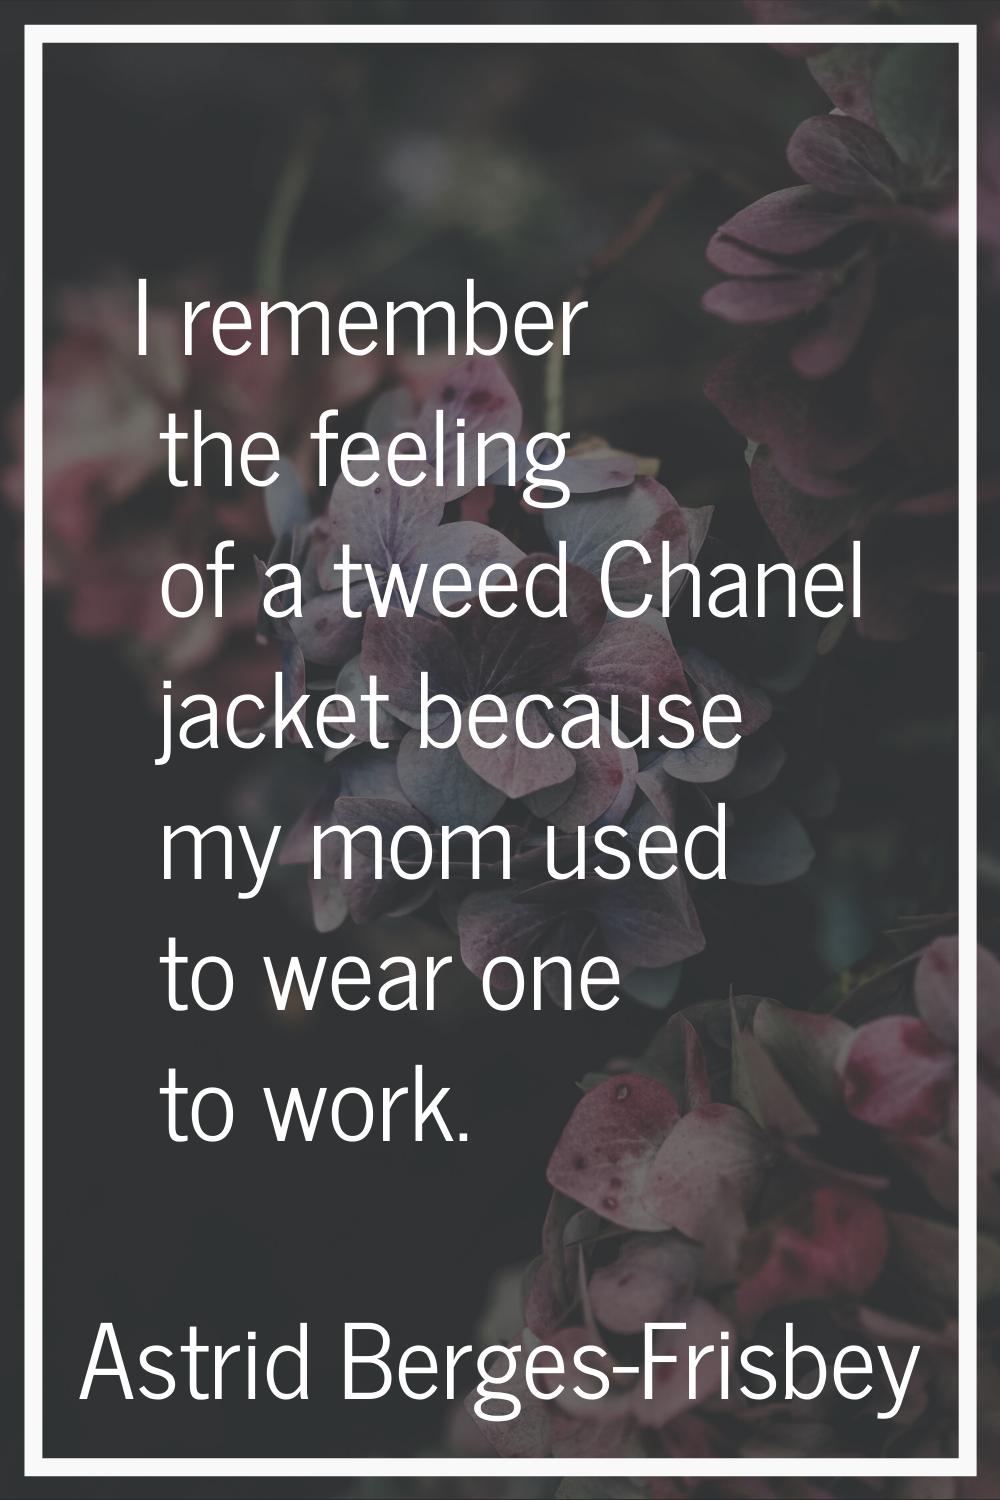 I remember the feeling of a tweed Chanel jacket because my mom used to wear one to work.